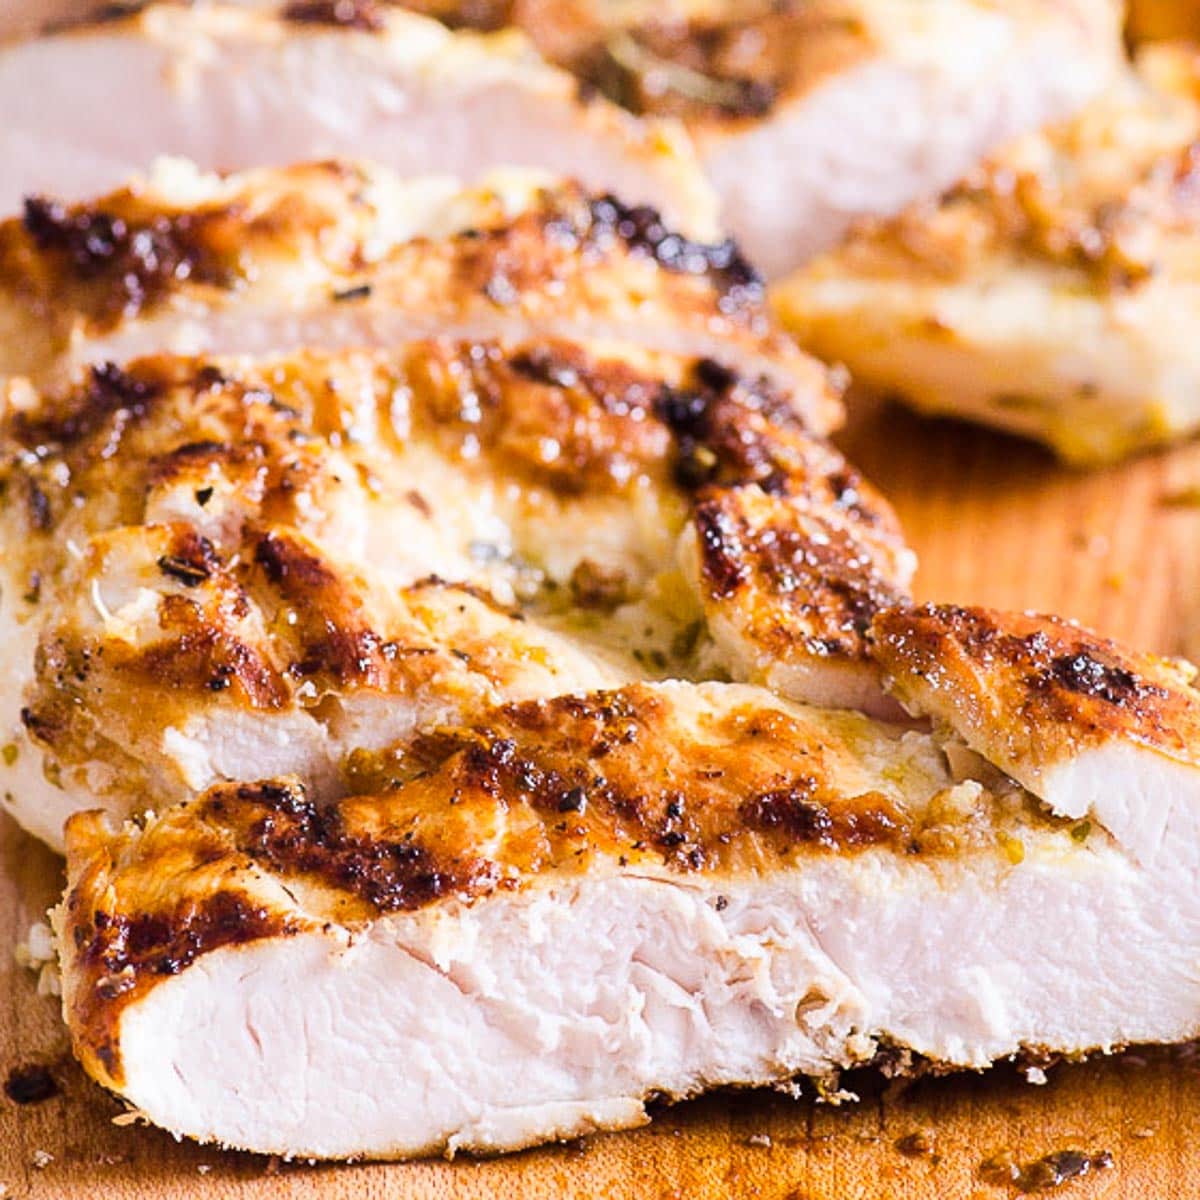 Sliced grilled chicken breast on cutting board.